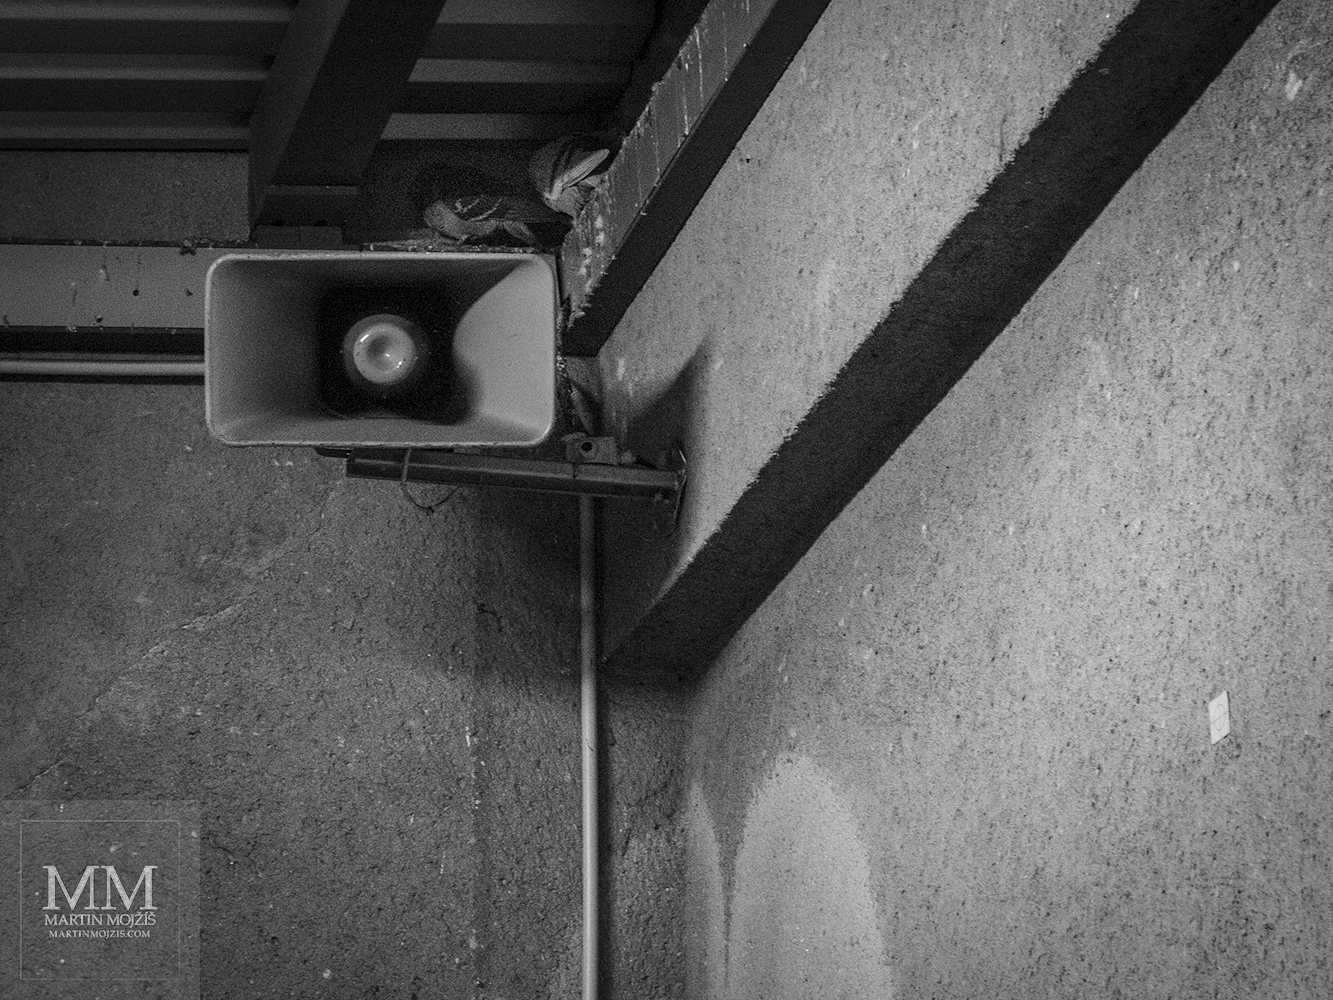 Pigeons nesting above one of the speakers. Zdice railway station.